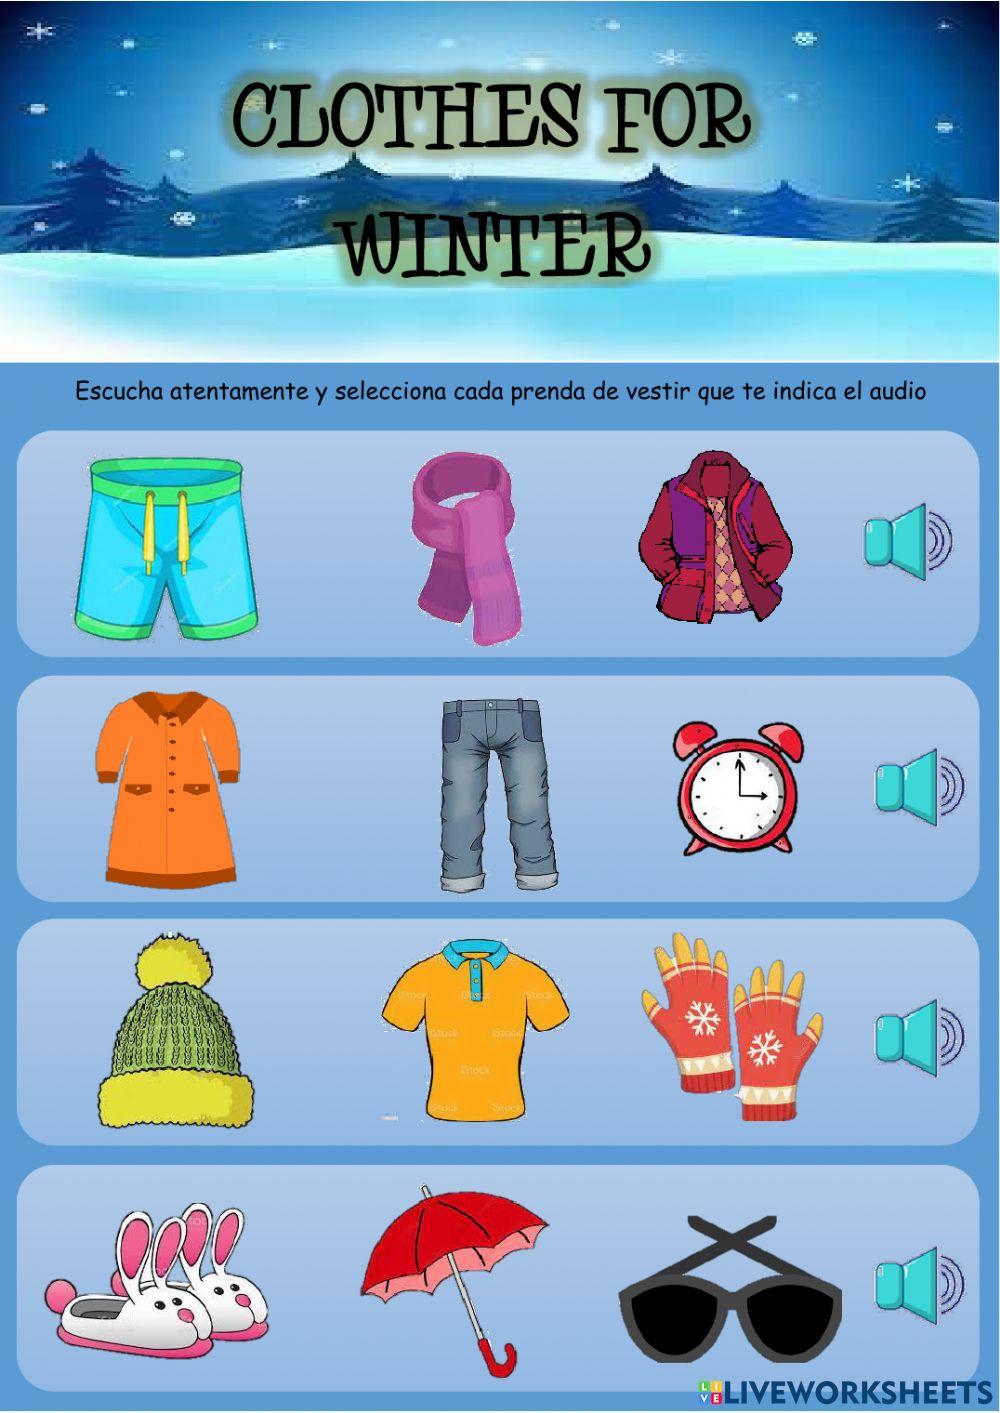 Clothes for winter